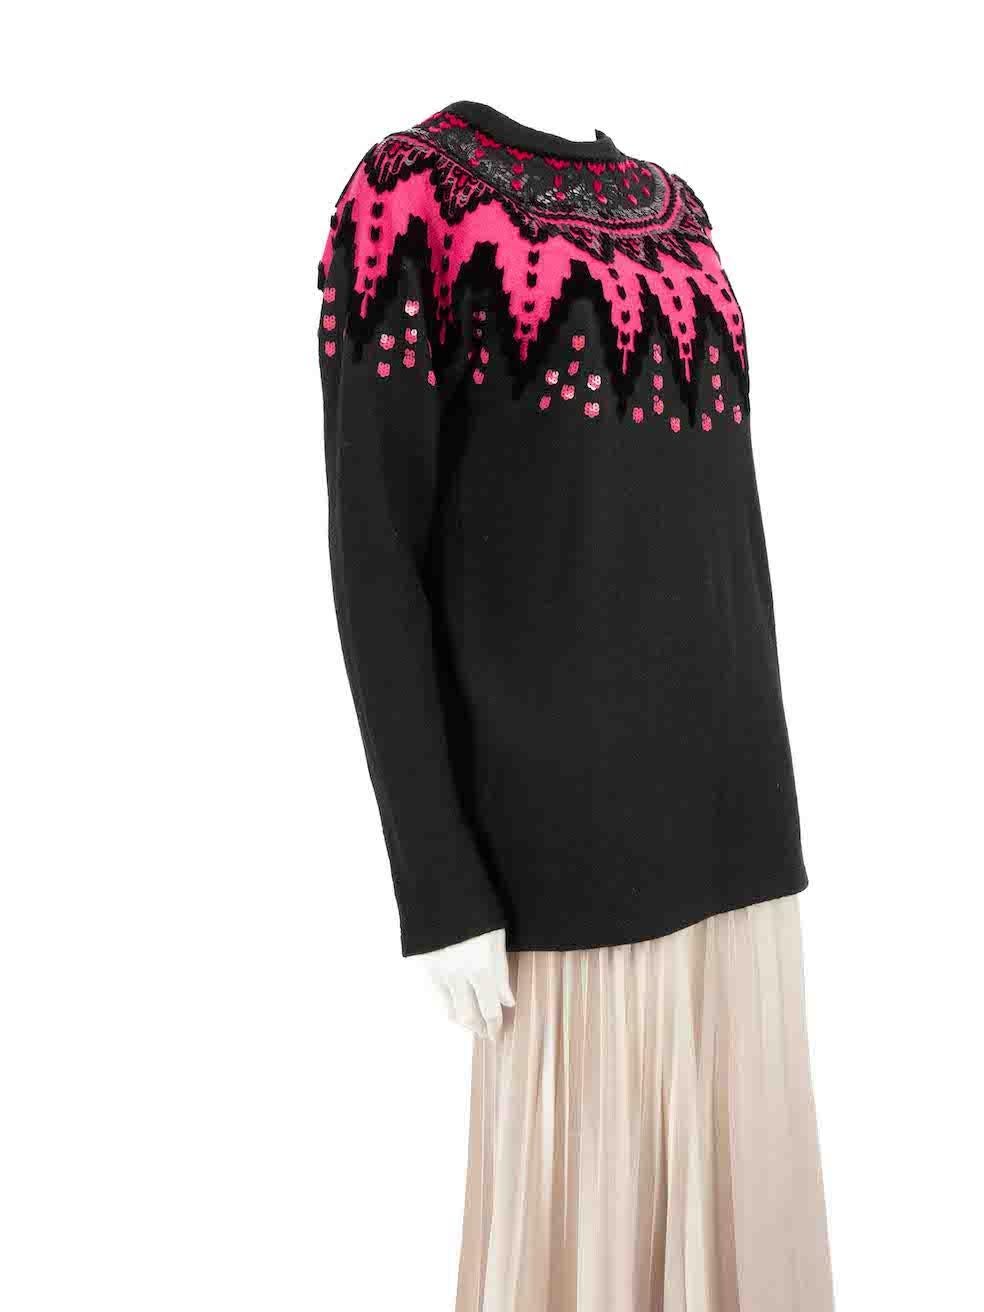 CONDITION is Very good. Hardly any visible wear to jumper is evident on this used Ermanno Scervino designer resale item.
 
 Details
 Black
 Wool
 Jumper
 Pink neckline pattern detail
 Round neck
 Velvet and sequin embellishment
 Long sleeves
 
 
